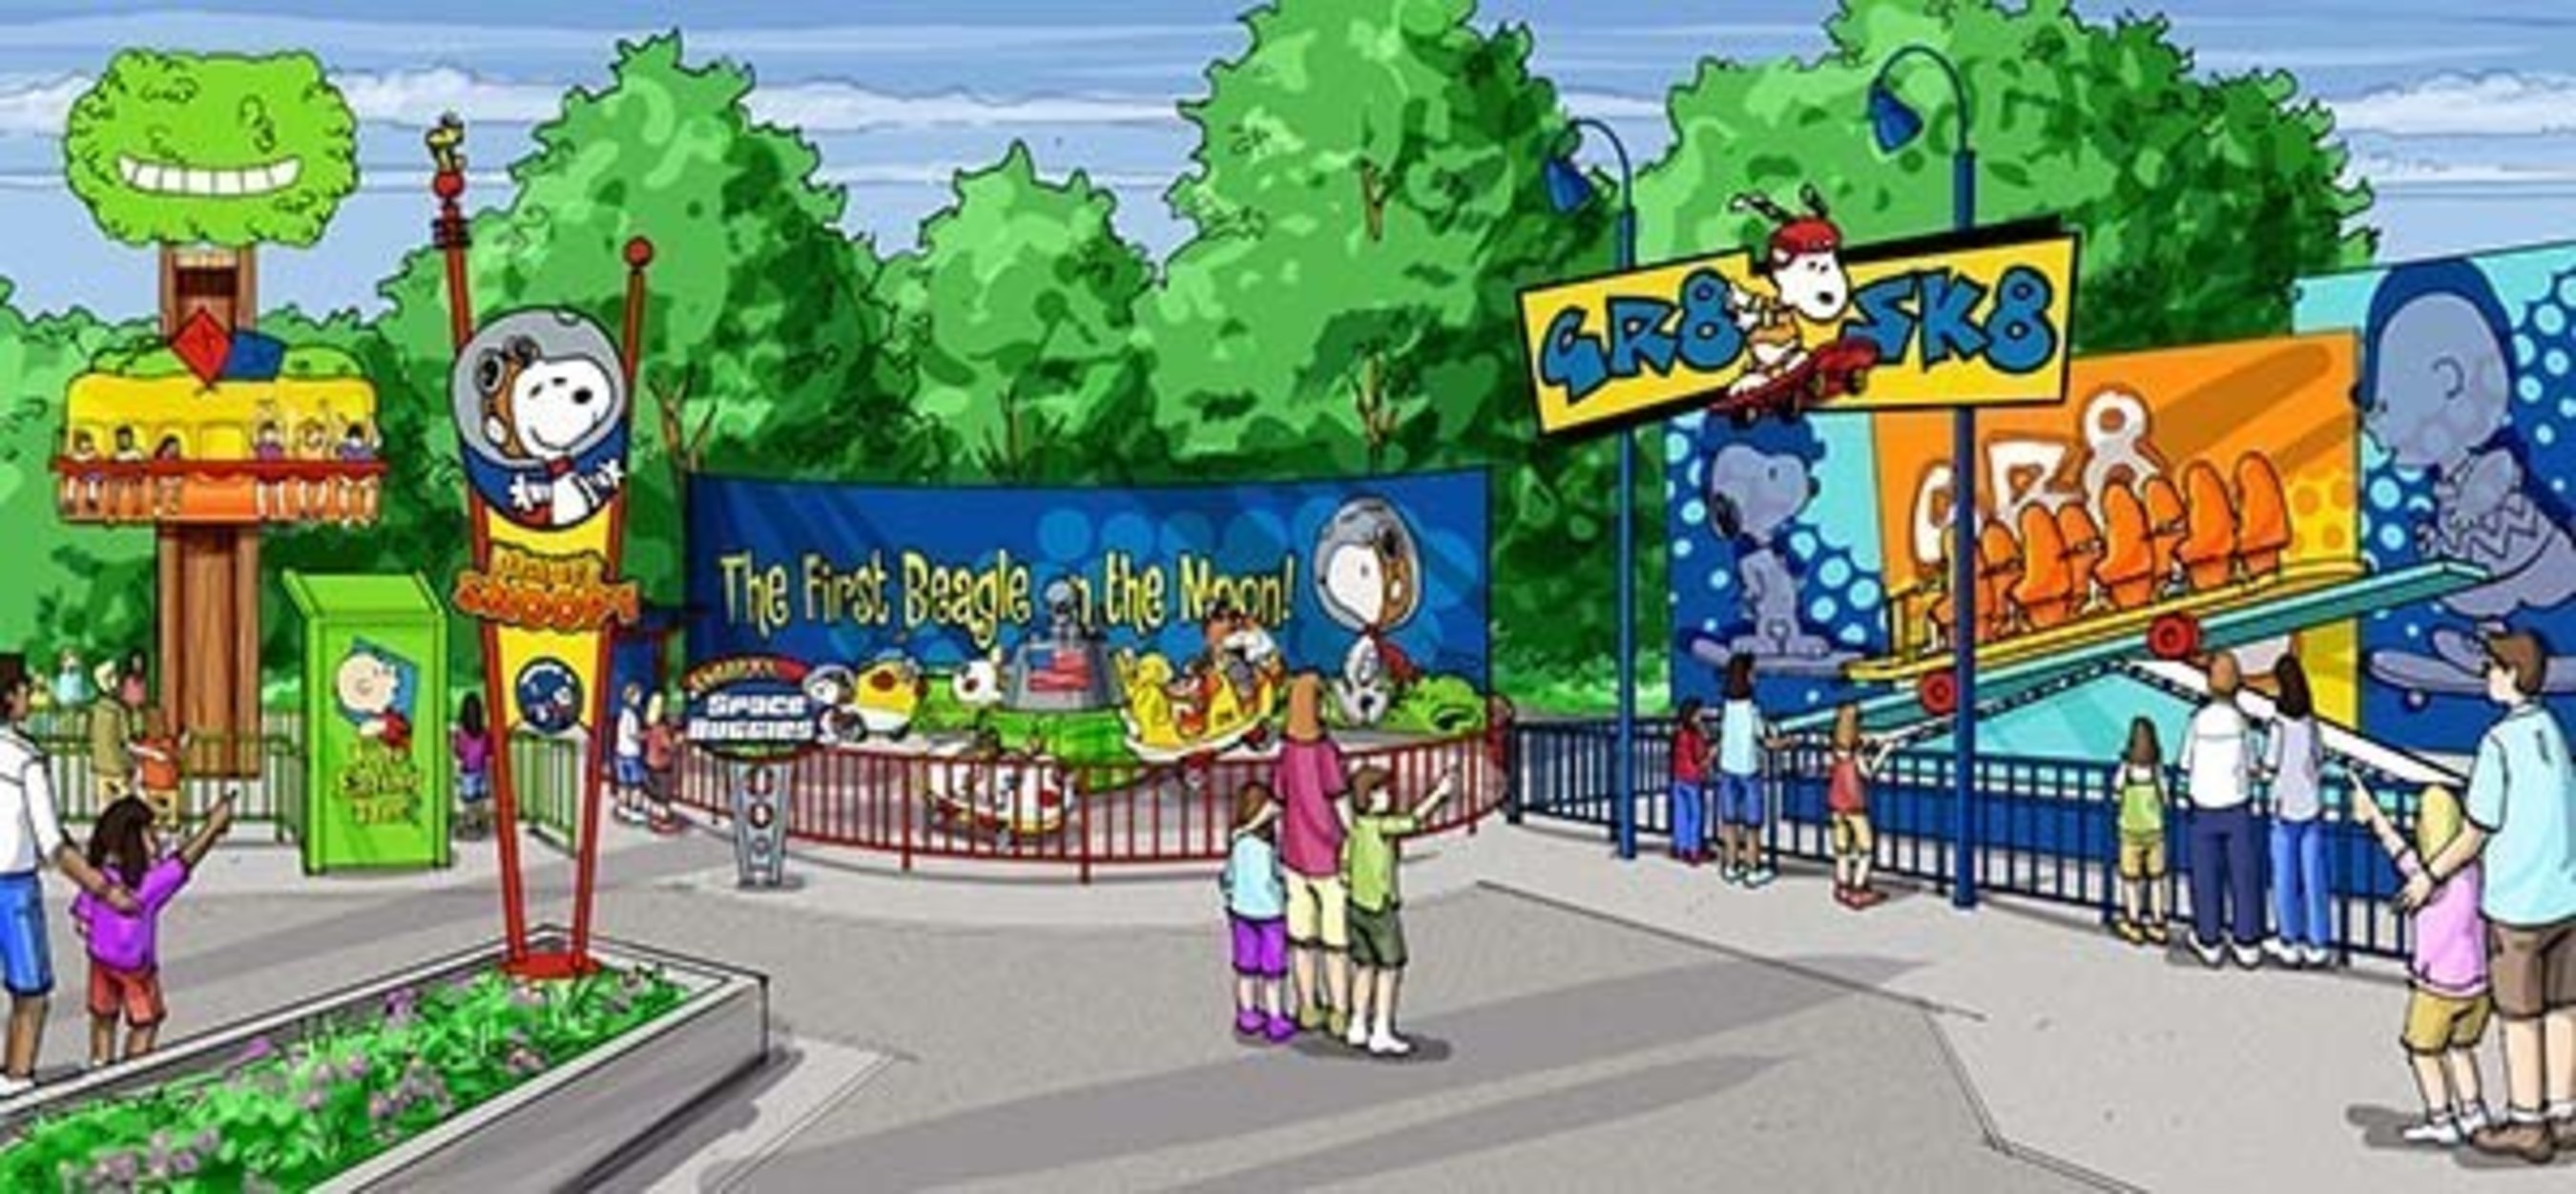 The expanded Planet Snoopy at California's Great America will feature three new rides that parents can enjoy with their kids. The 40th anniversary season begins March 28-29.